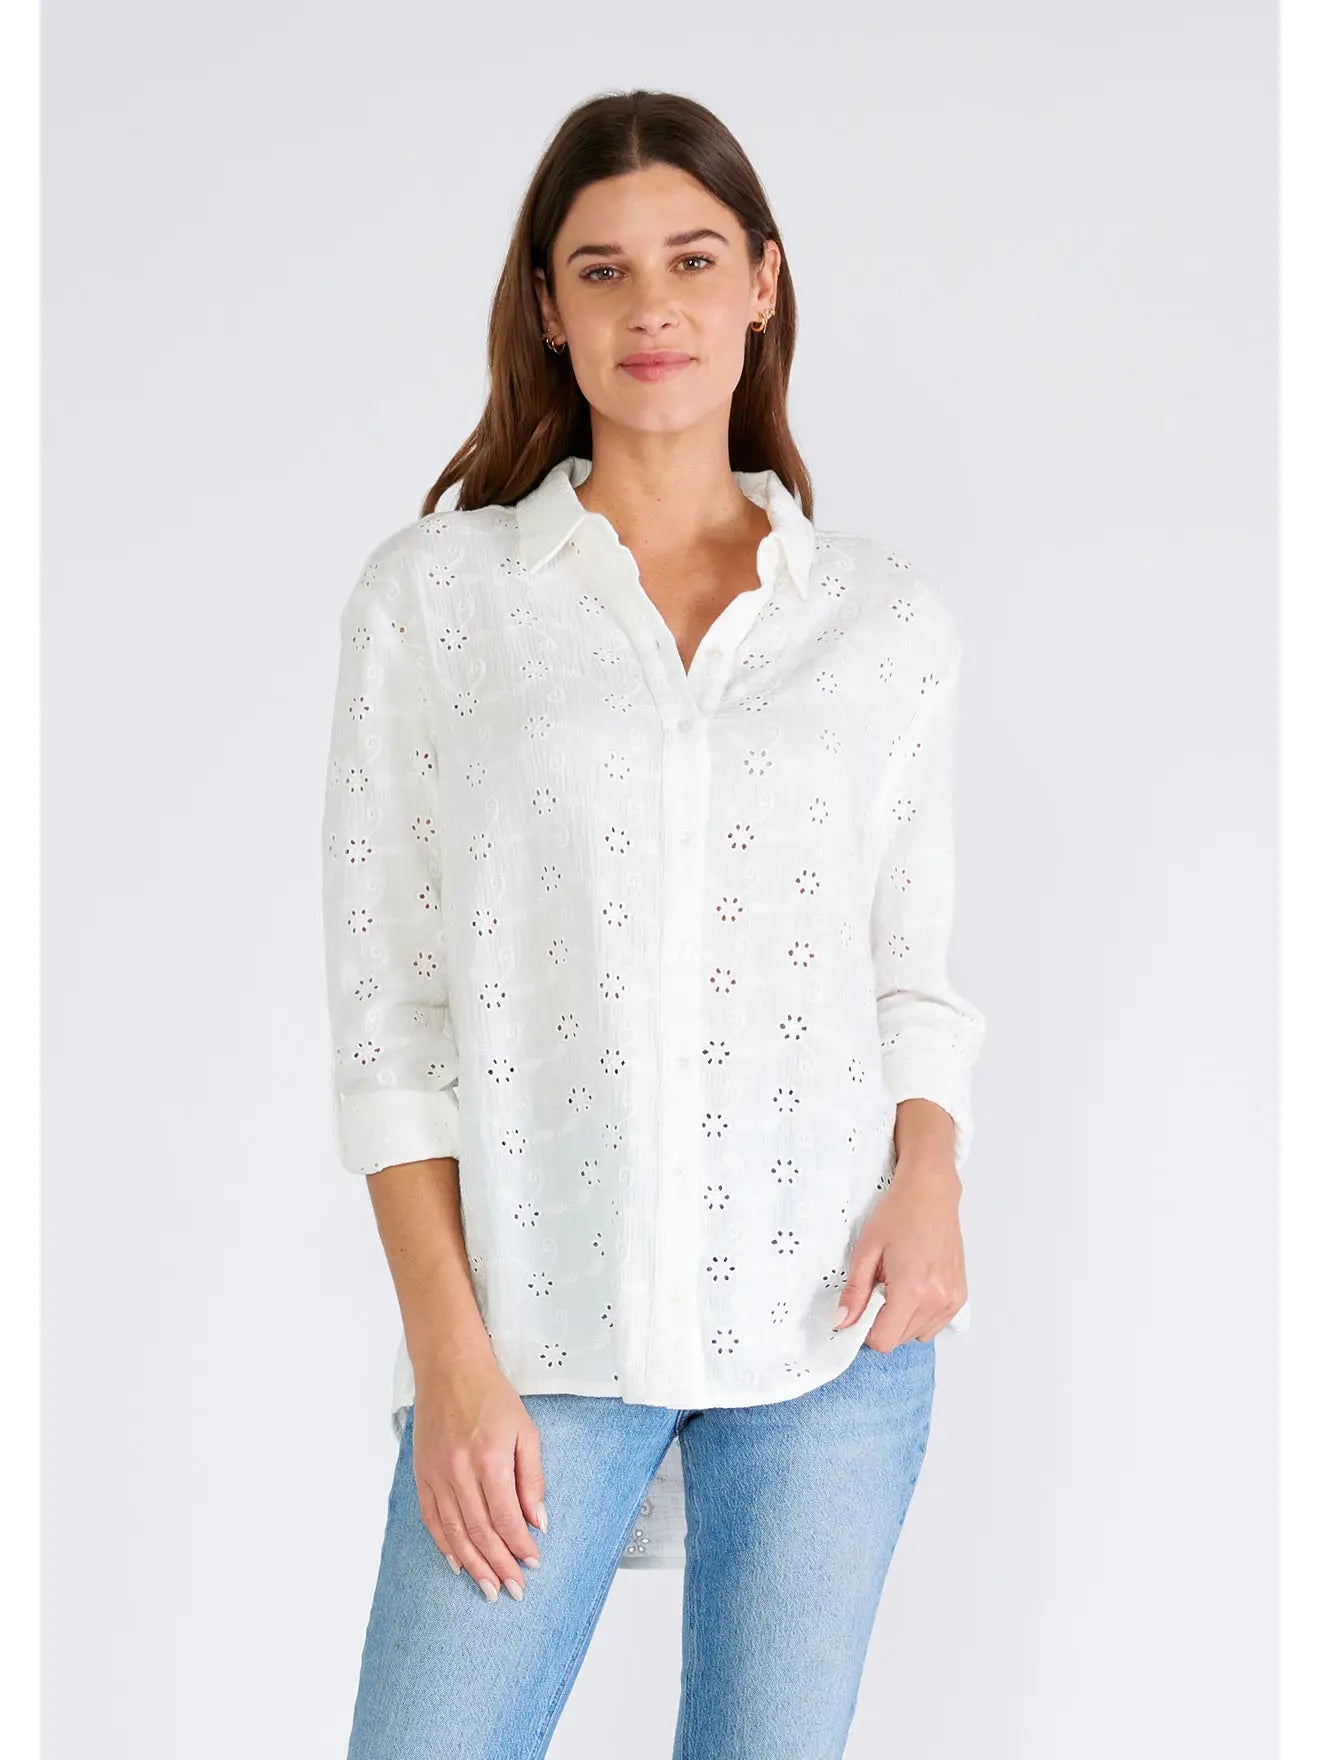 Floral Embroidered Button Down Blouse